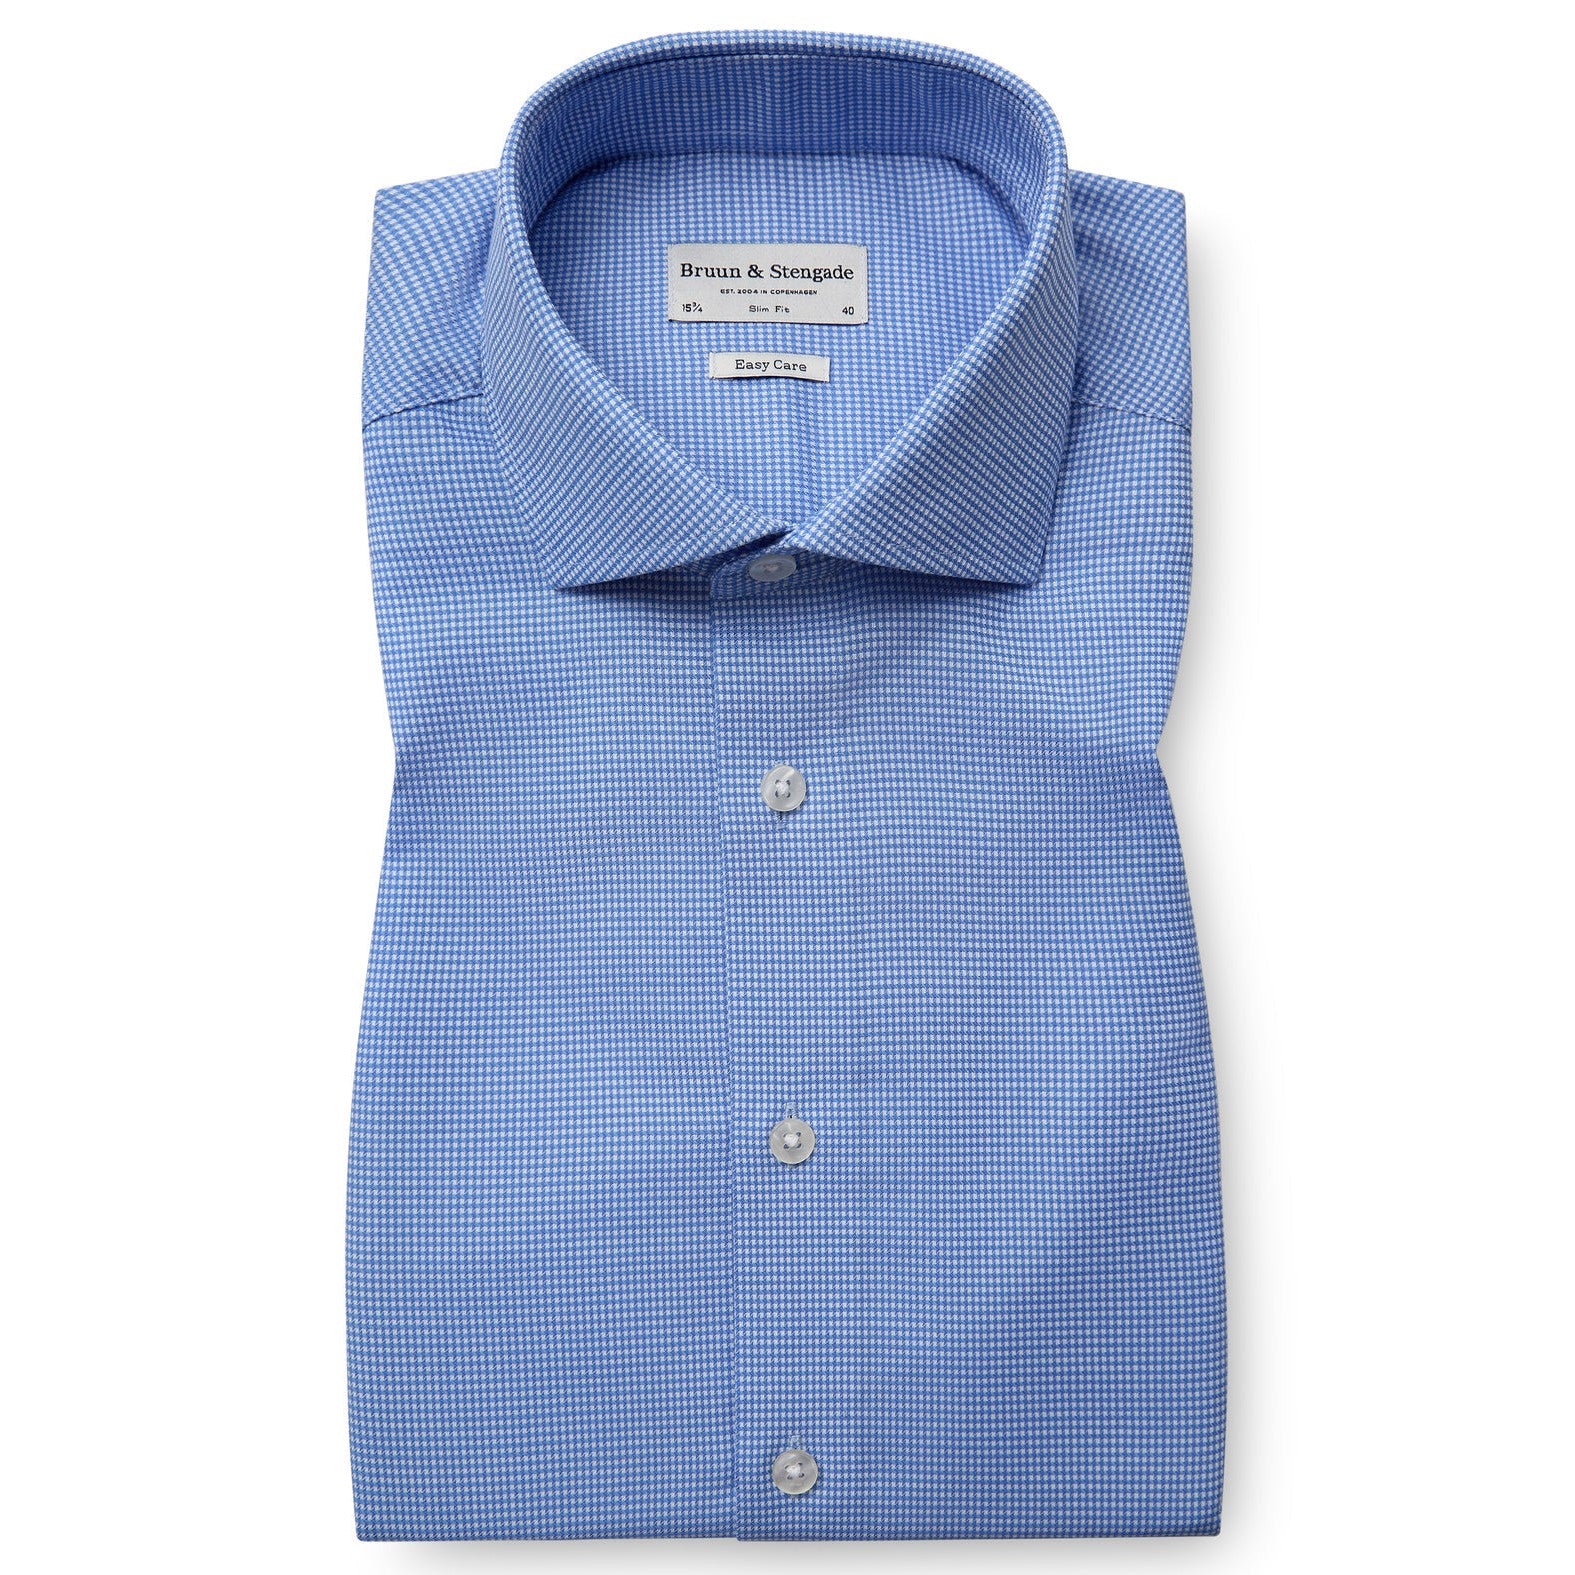 YOUNG MINI HOUNDSTOOTH WOVEN SLIM FIT-MENS SHIRTS-BRUUN STENGADE-JB Evans Fashions & Footwear